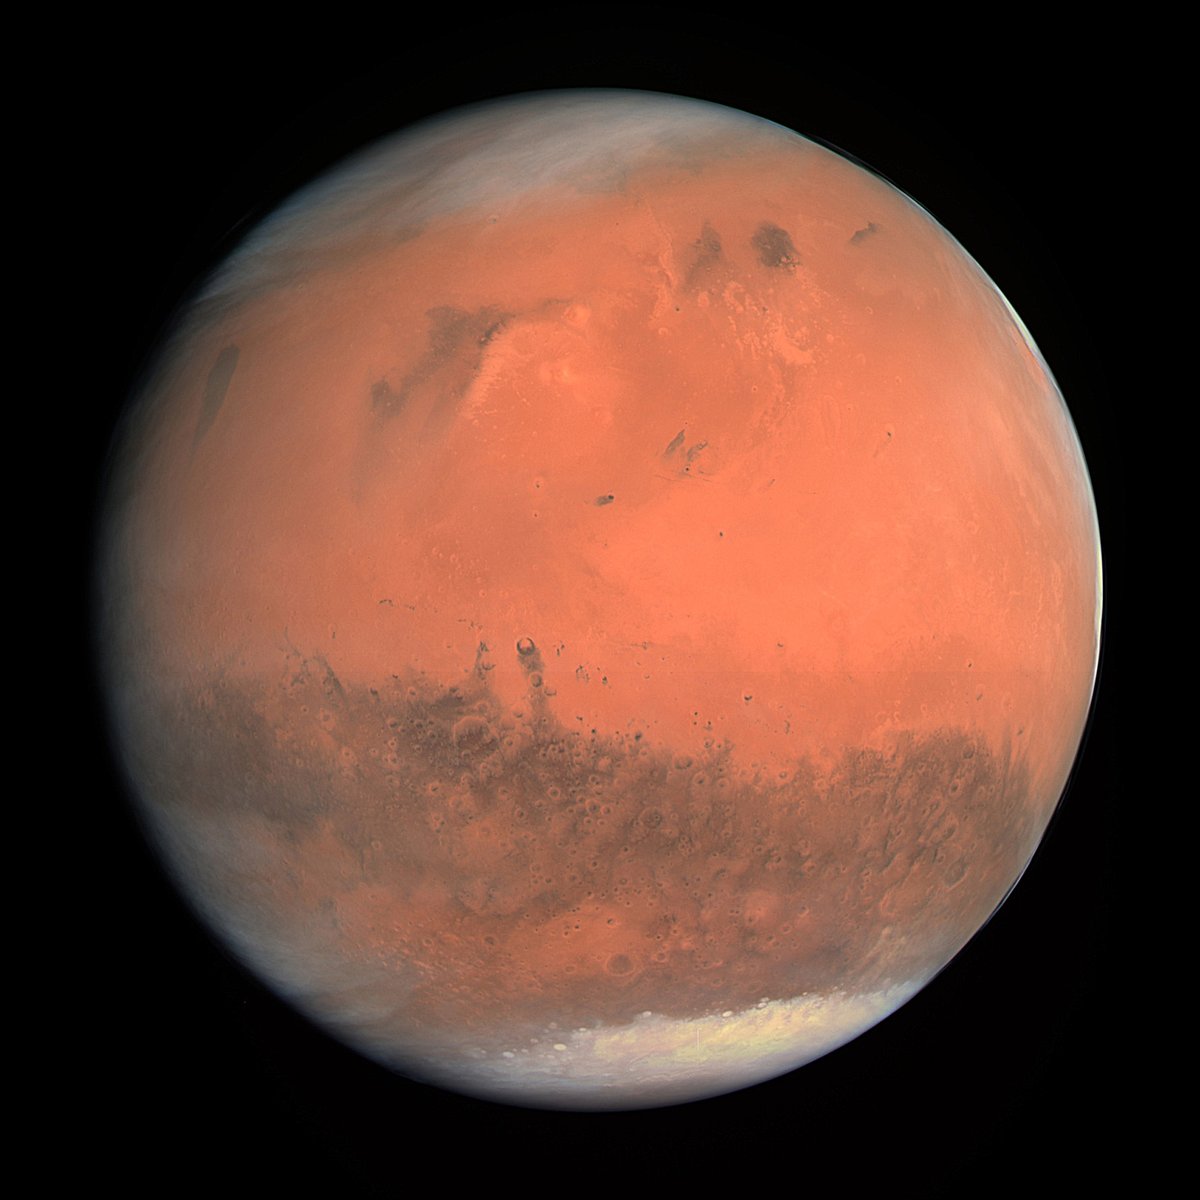 So that's why Mars is called the Red Planet. (Though between you and me, it looks more orange than red.)This true-color image of Mars was taken by the OSIRIS instrument on ESA's Rosetta spacecraft:  https://s.si.edu/34CTXZc 